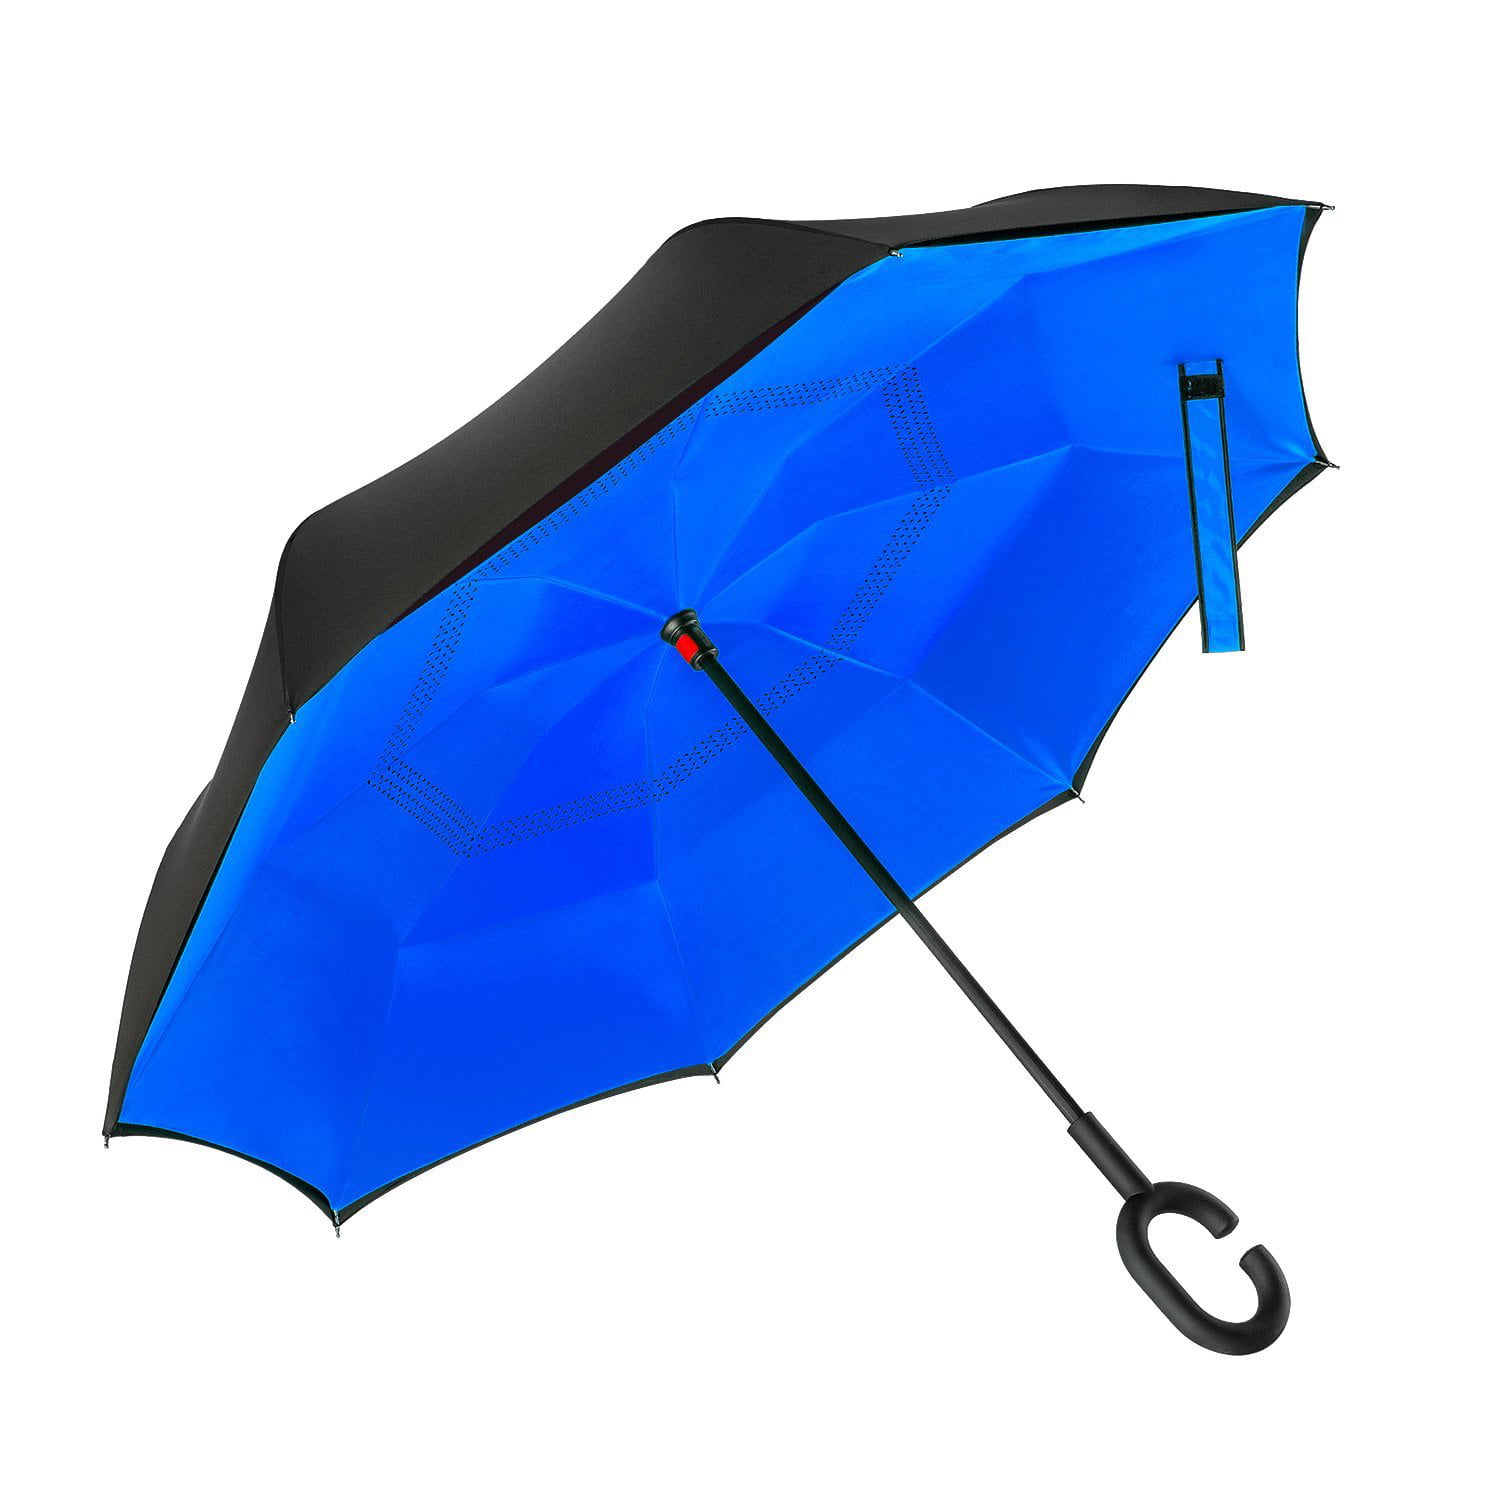 Reverse Folding Double Layer Inside Out Outdoor Rain Away Car Umbrella Red Daisies ALINK Inverted Umbrella